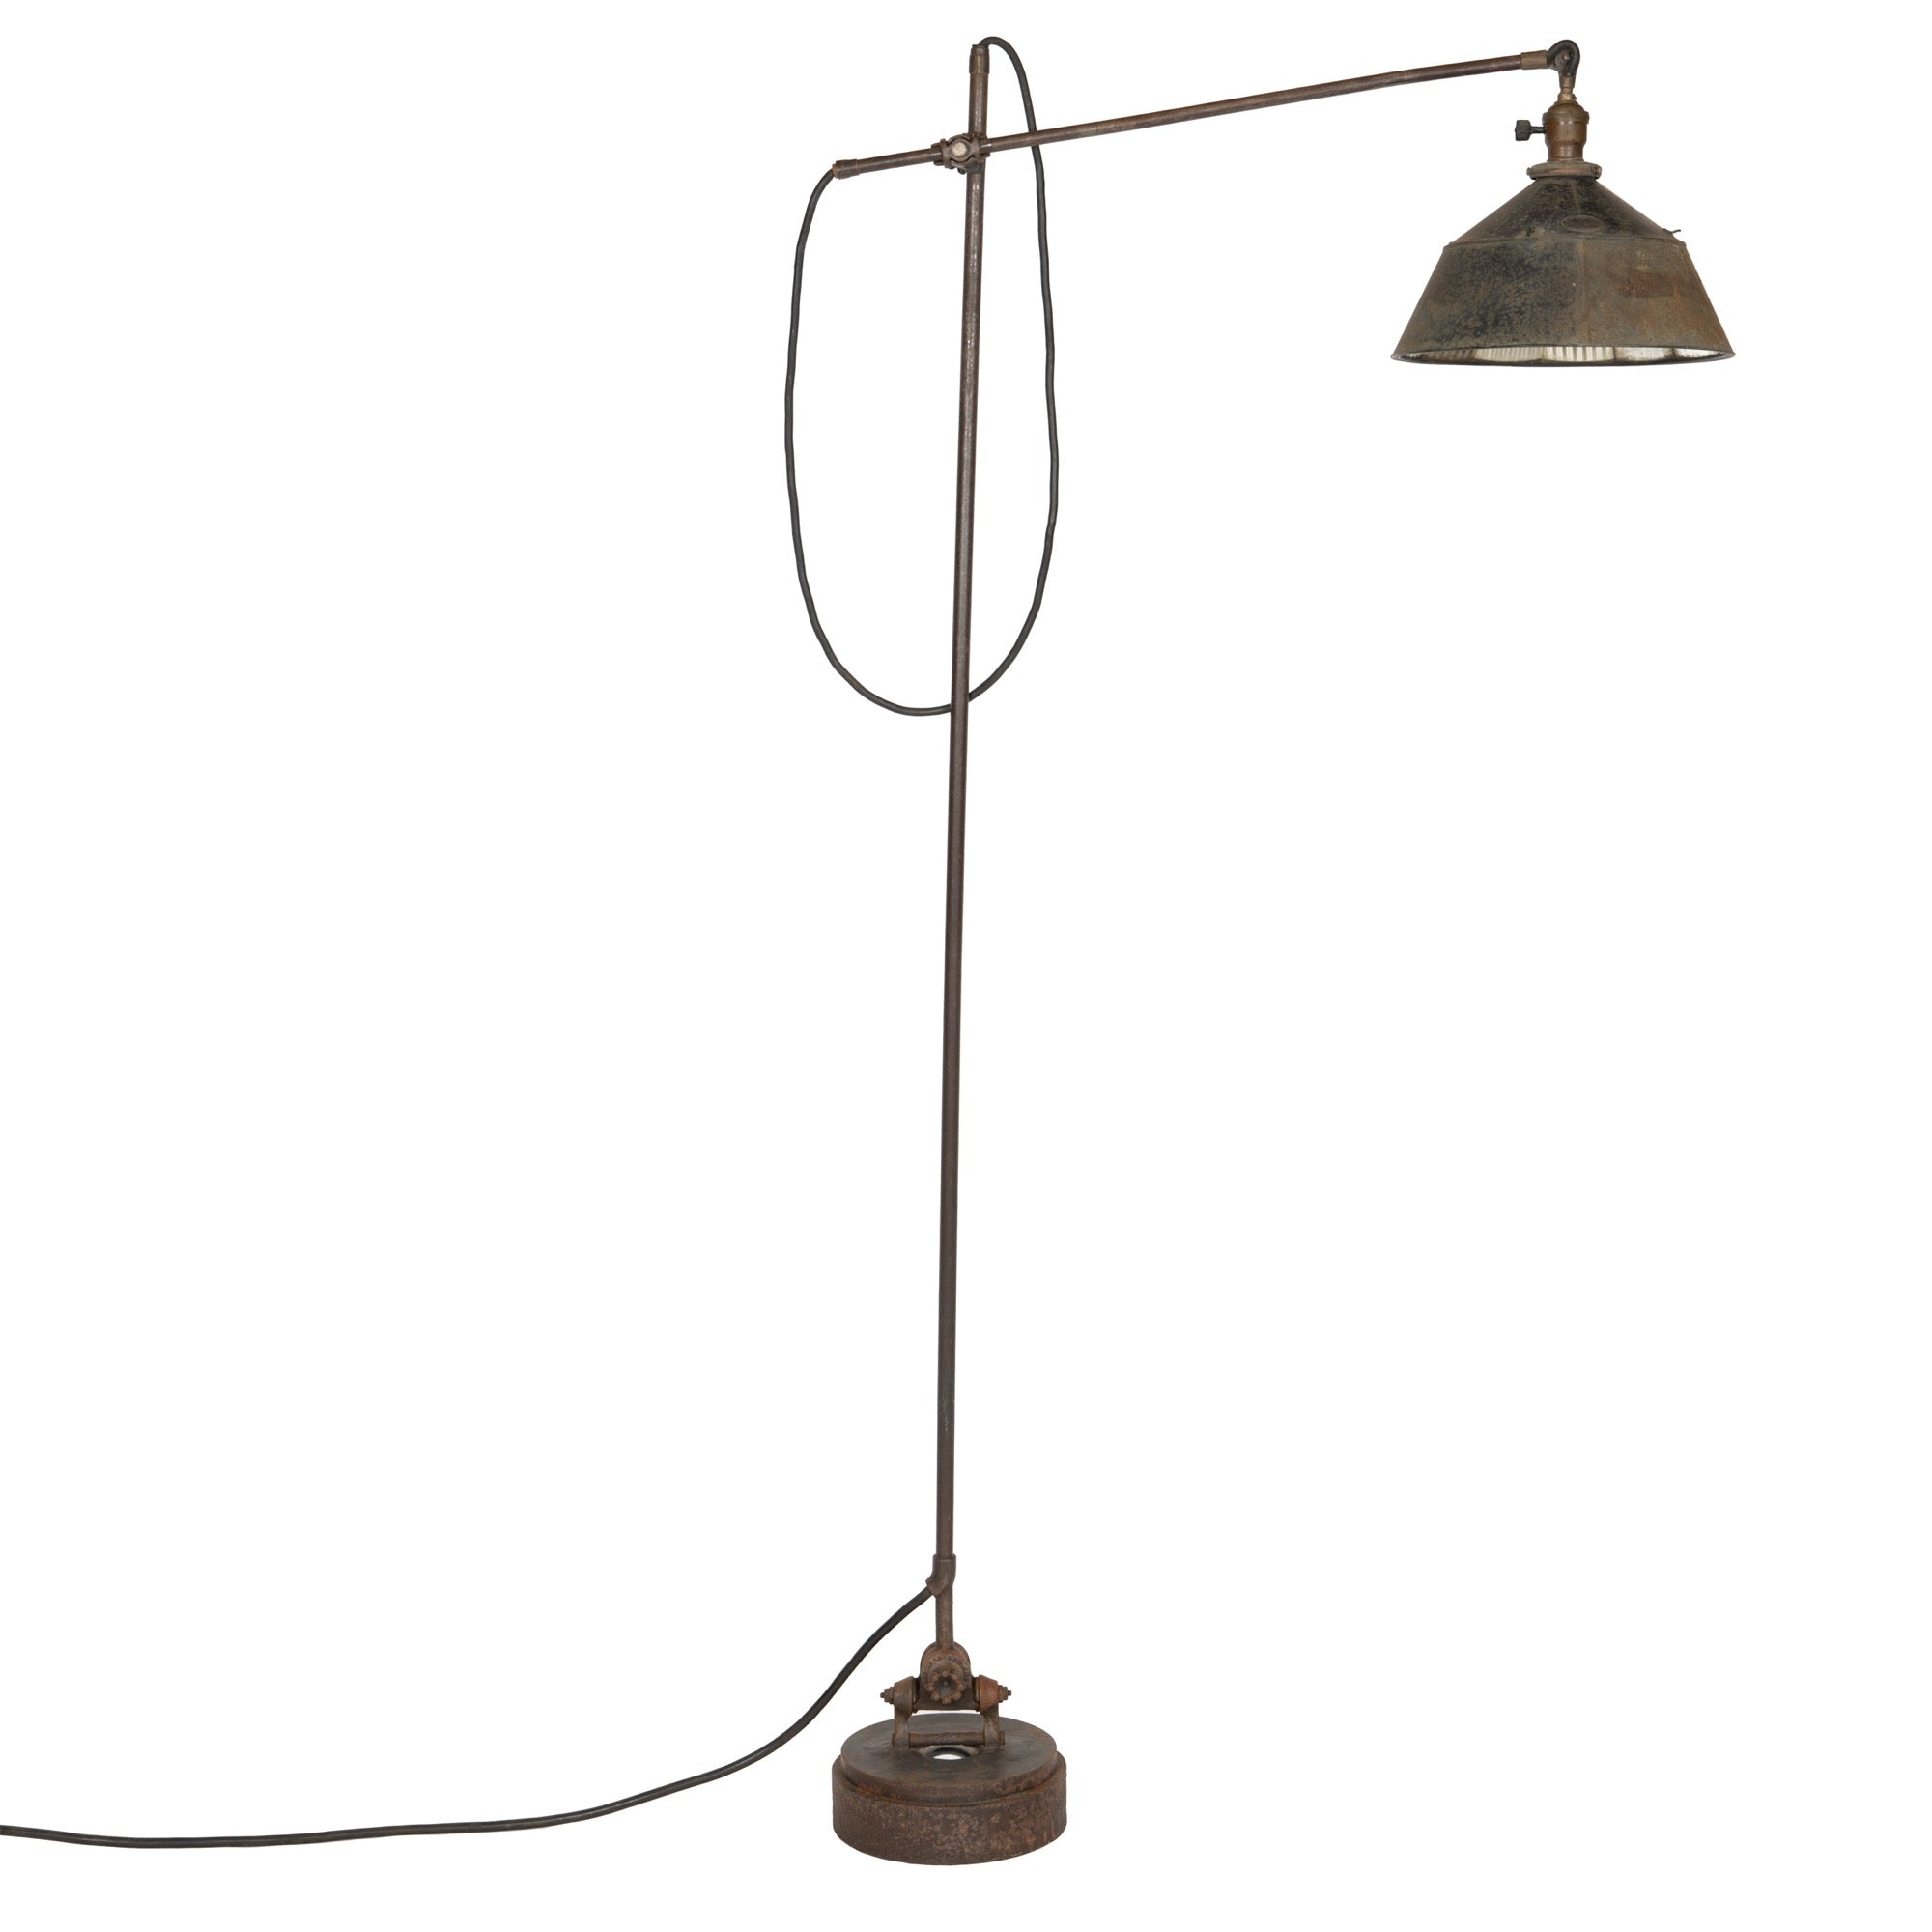 Multi Joint Articulating Floor Lamp by O.C. White for O.C. White Co., 1890-1910s